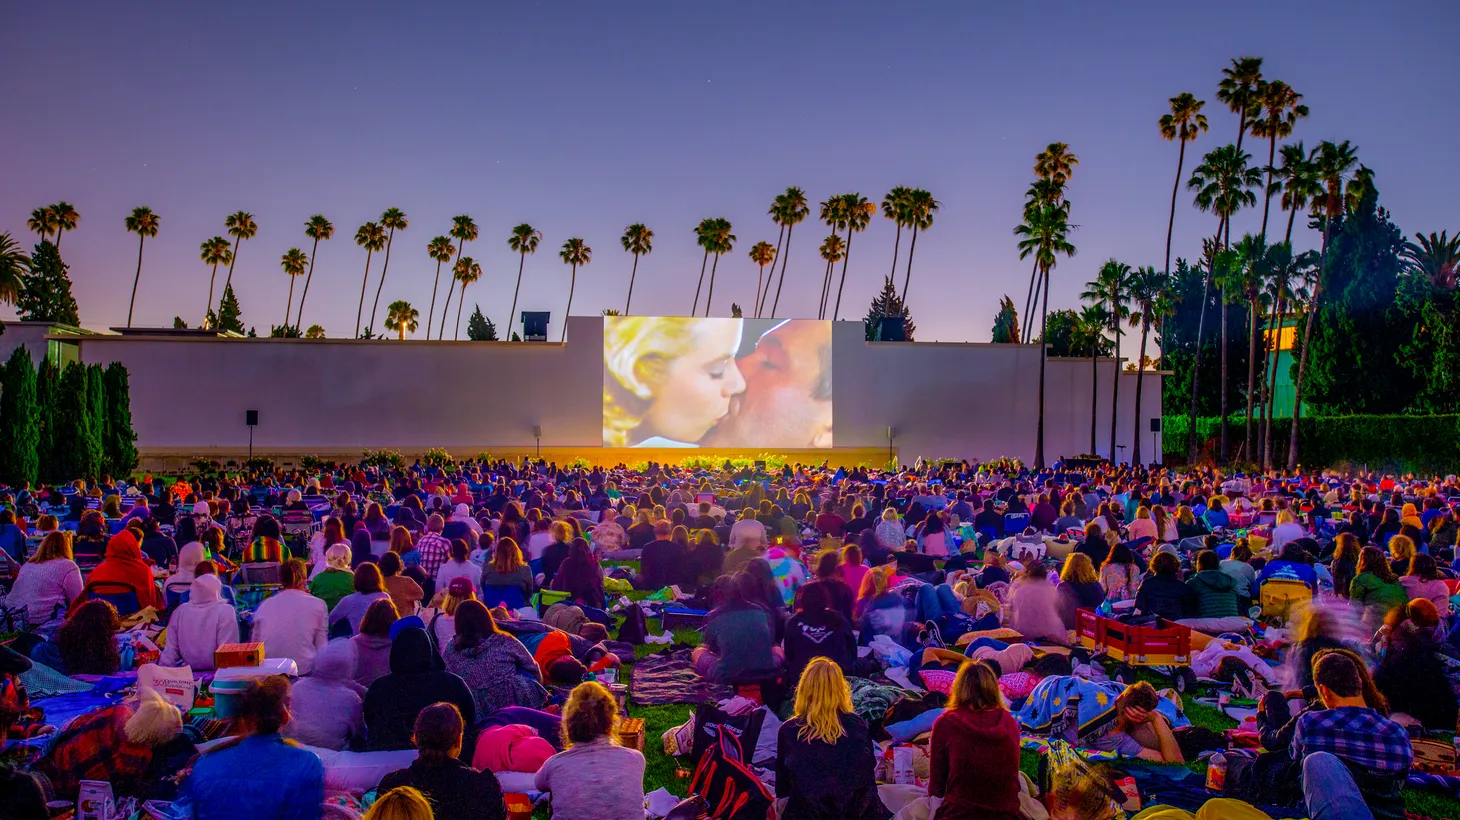 Part of the fun of LA’s Cinespia is coming together with people to watch the best of Hollywood, according to Founder John Wyatt.